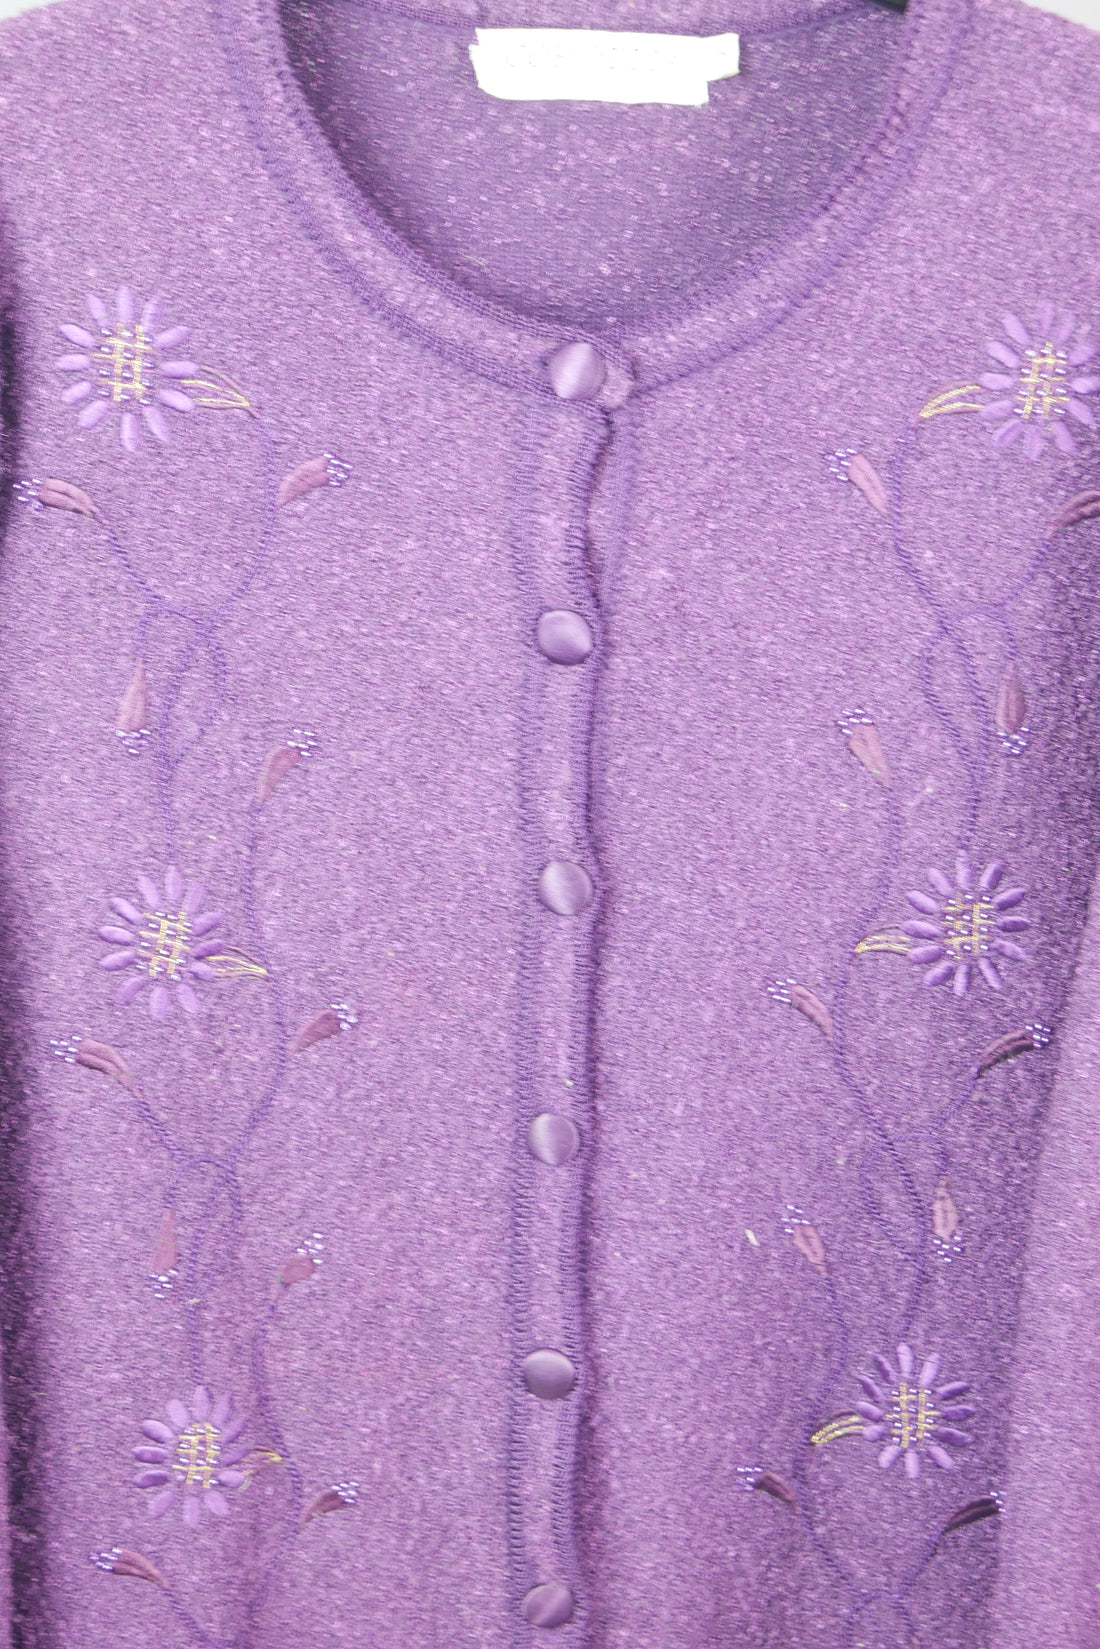 The Vintage Embroidered Cardigan (Women's S)